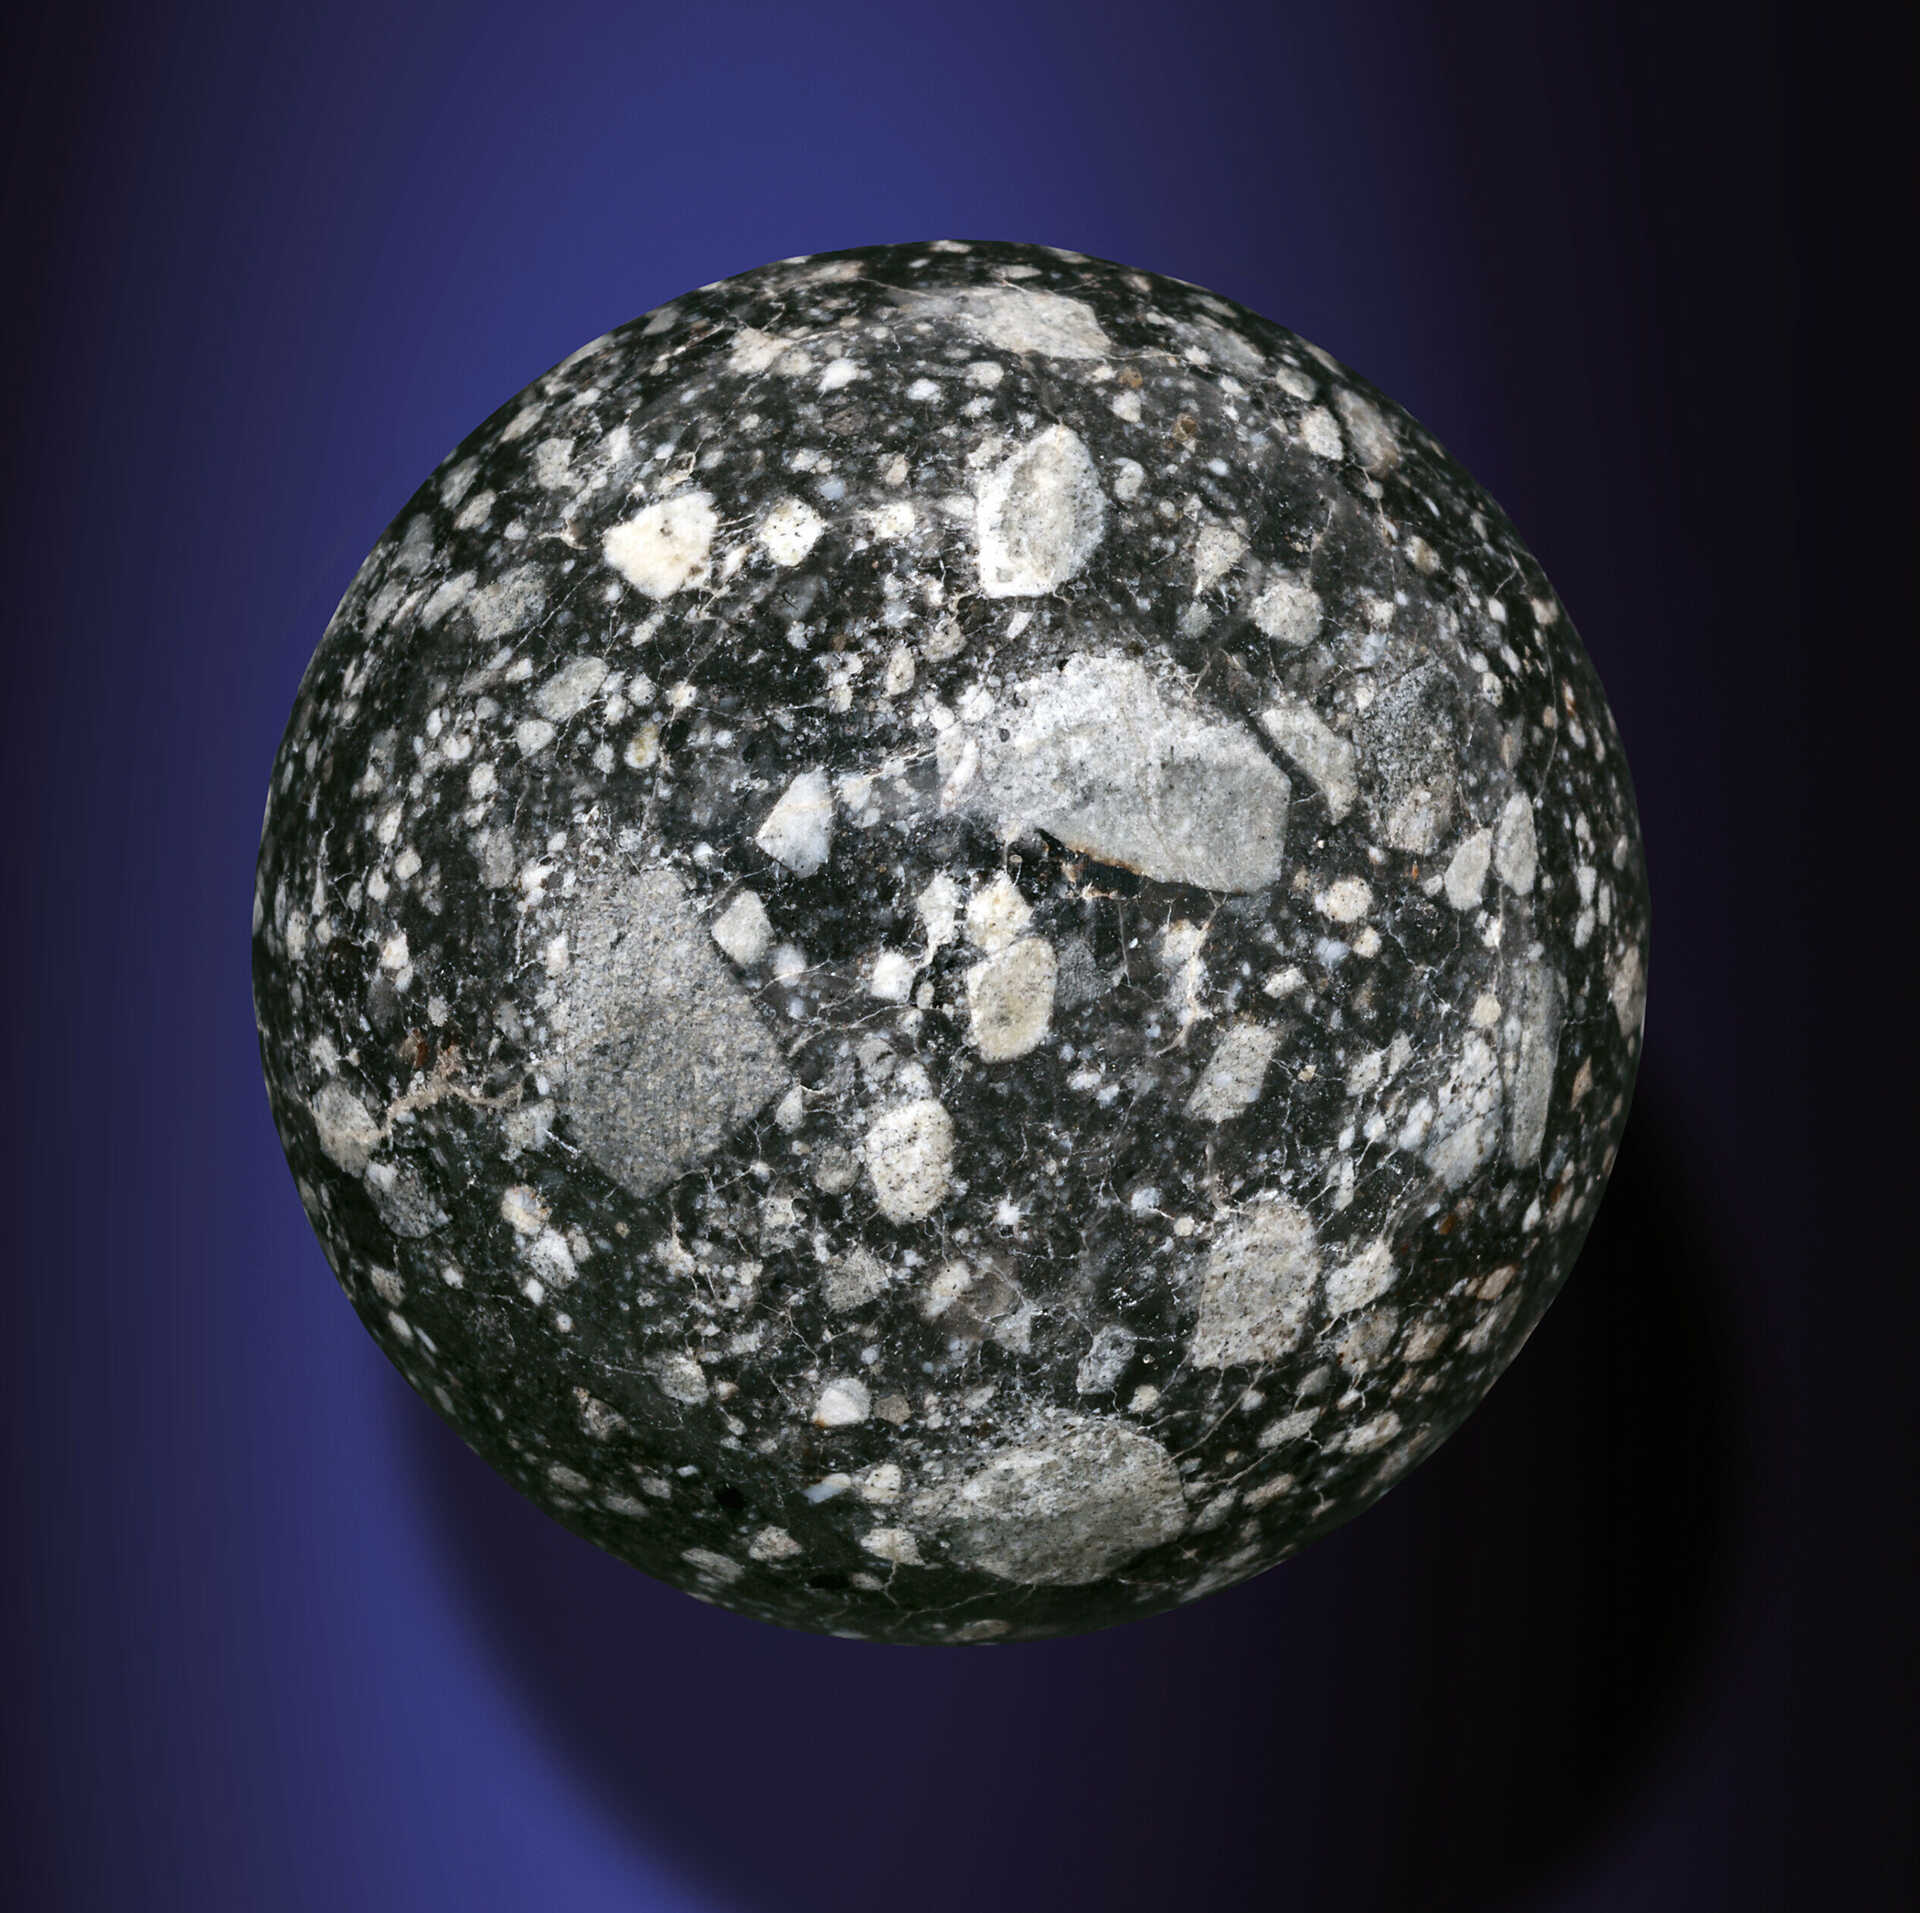 NWA 12691 — THE MOON FASHIONED INTO A SPHERE